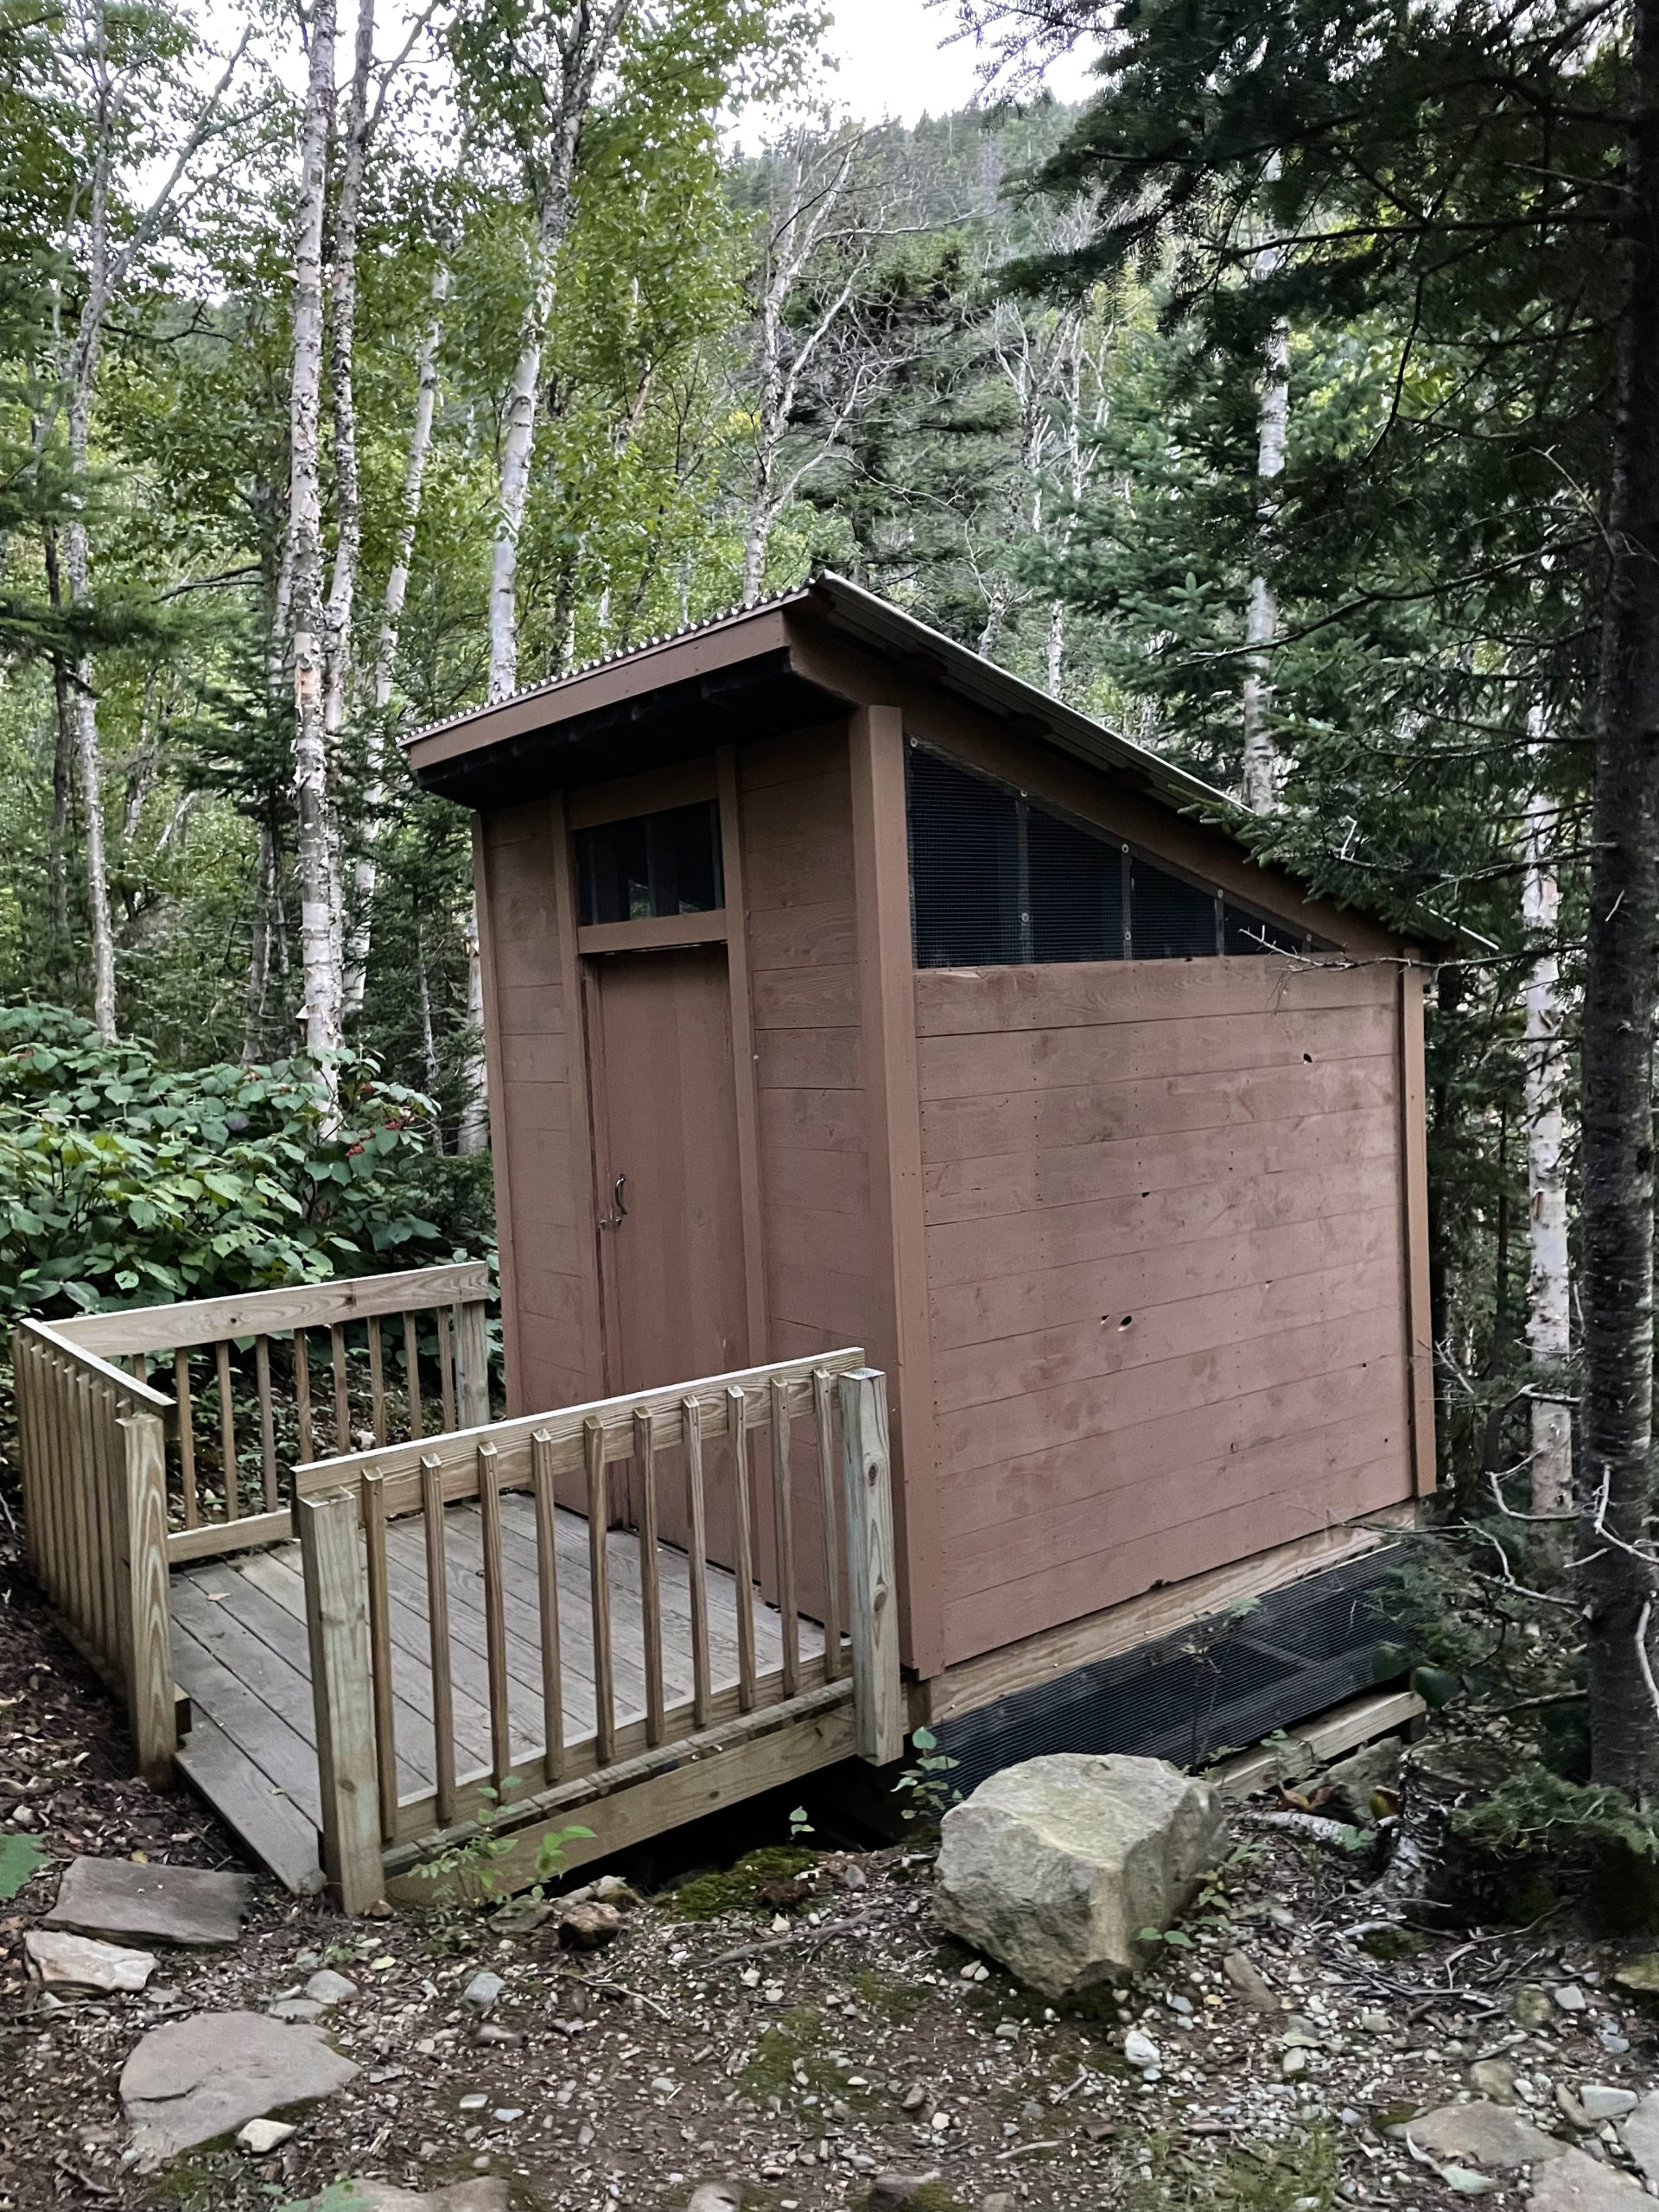 Reconstructed ADA compliant privy, day 3, 100 Mile Wilderness, Maine Appalachian Trail